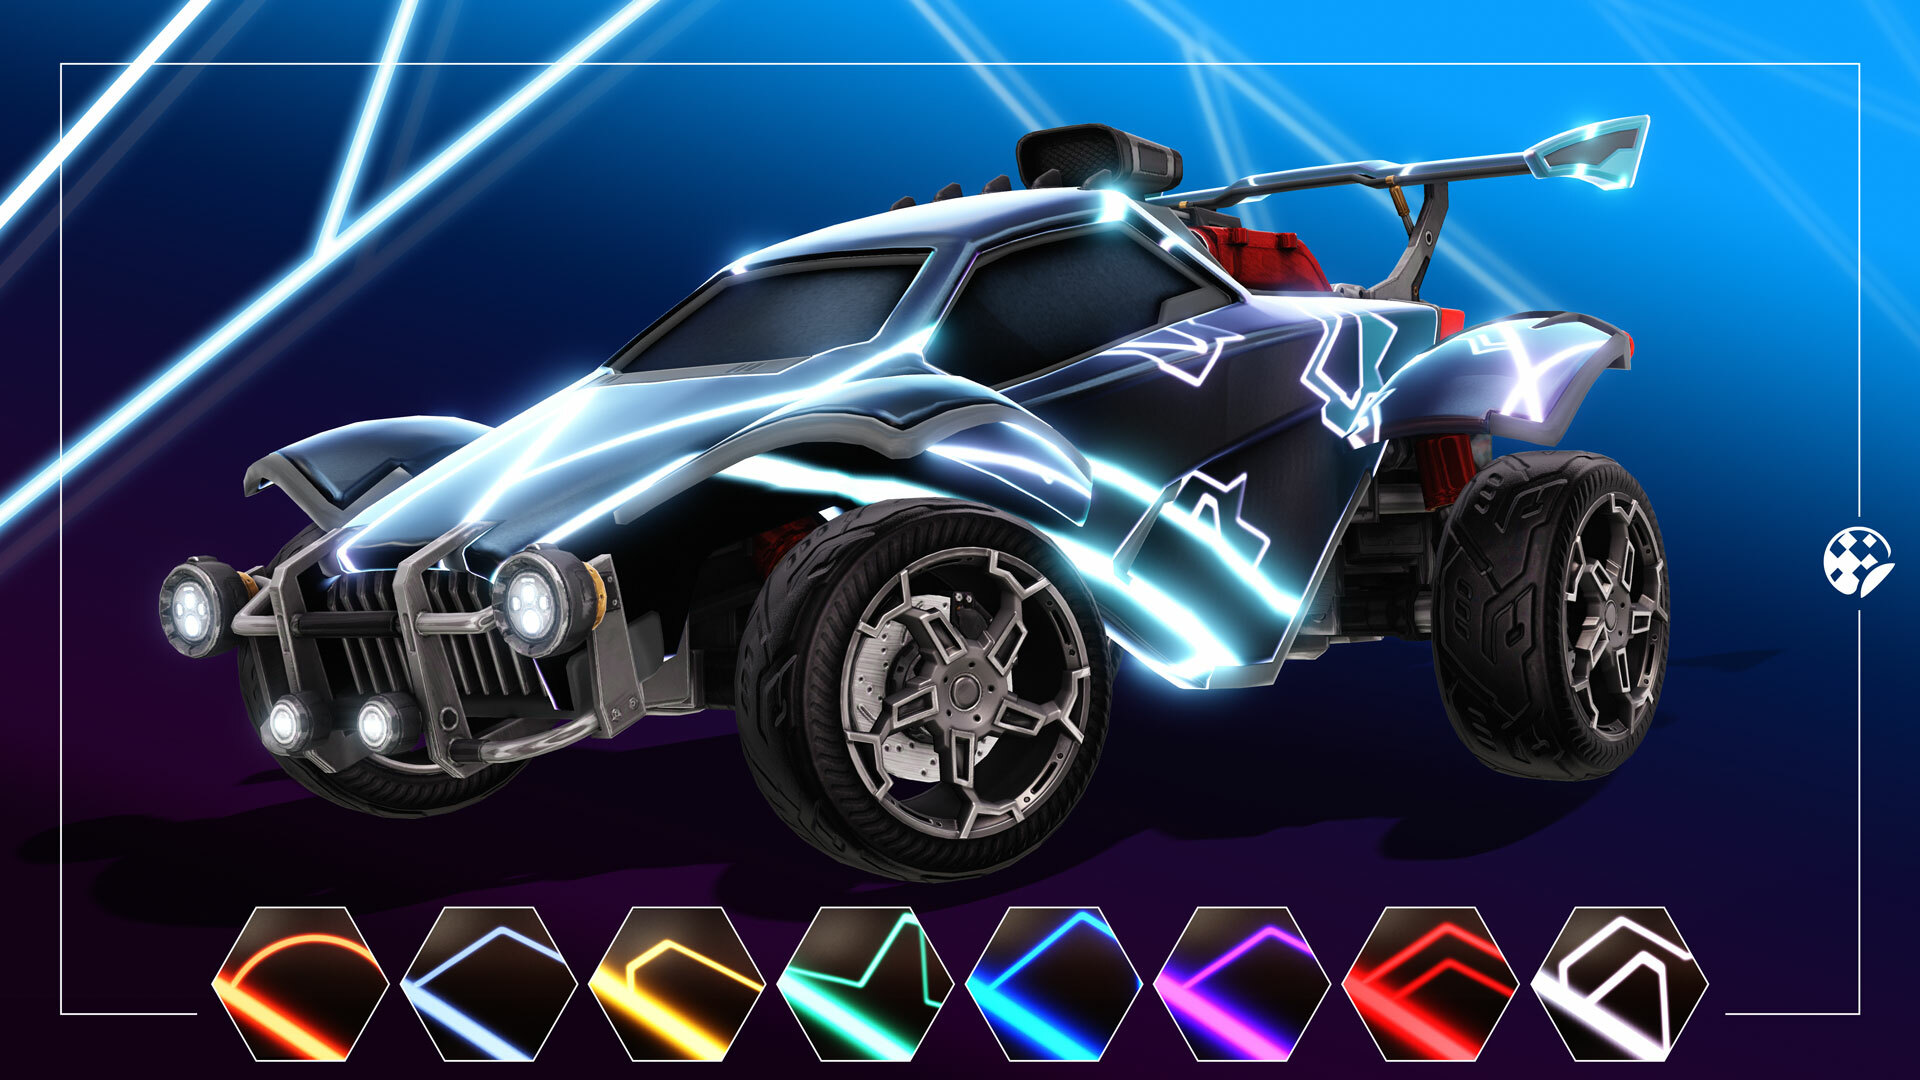 Rocket League review: 3 years, countless updates and professional